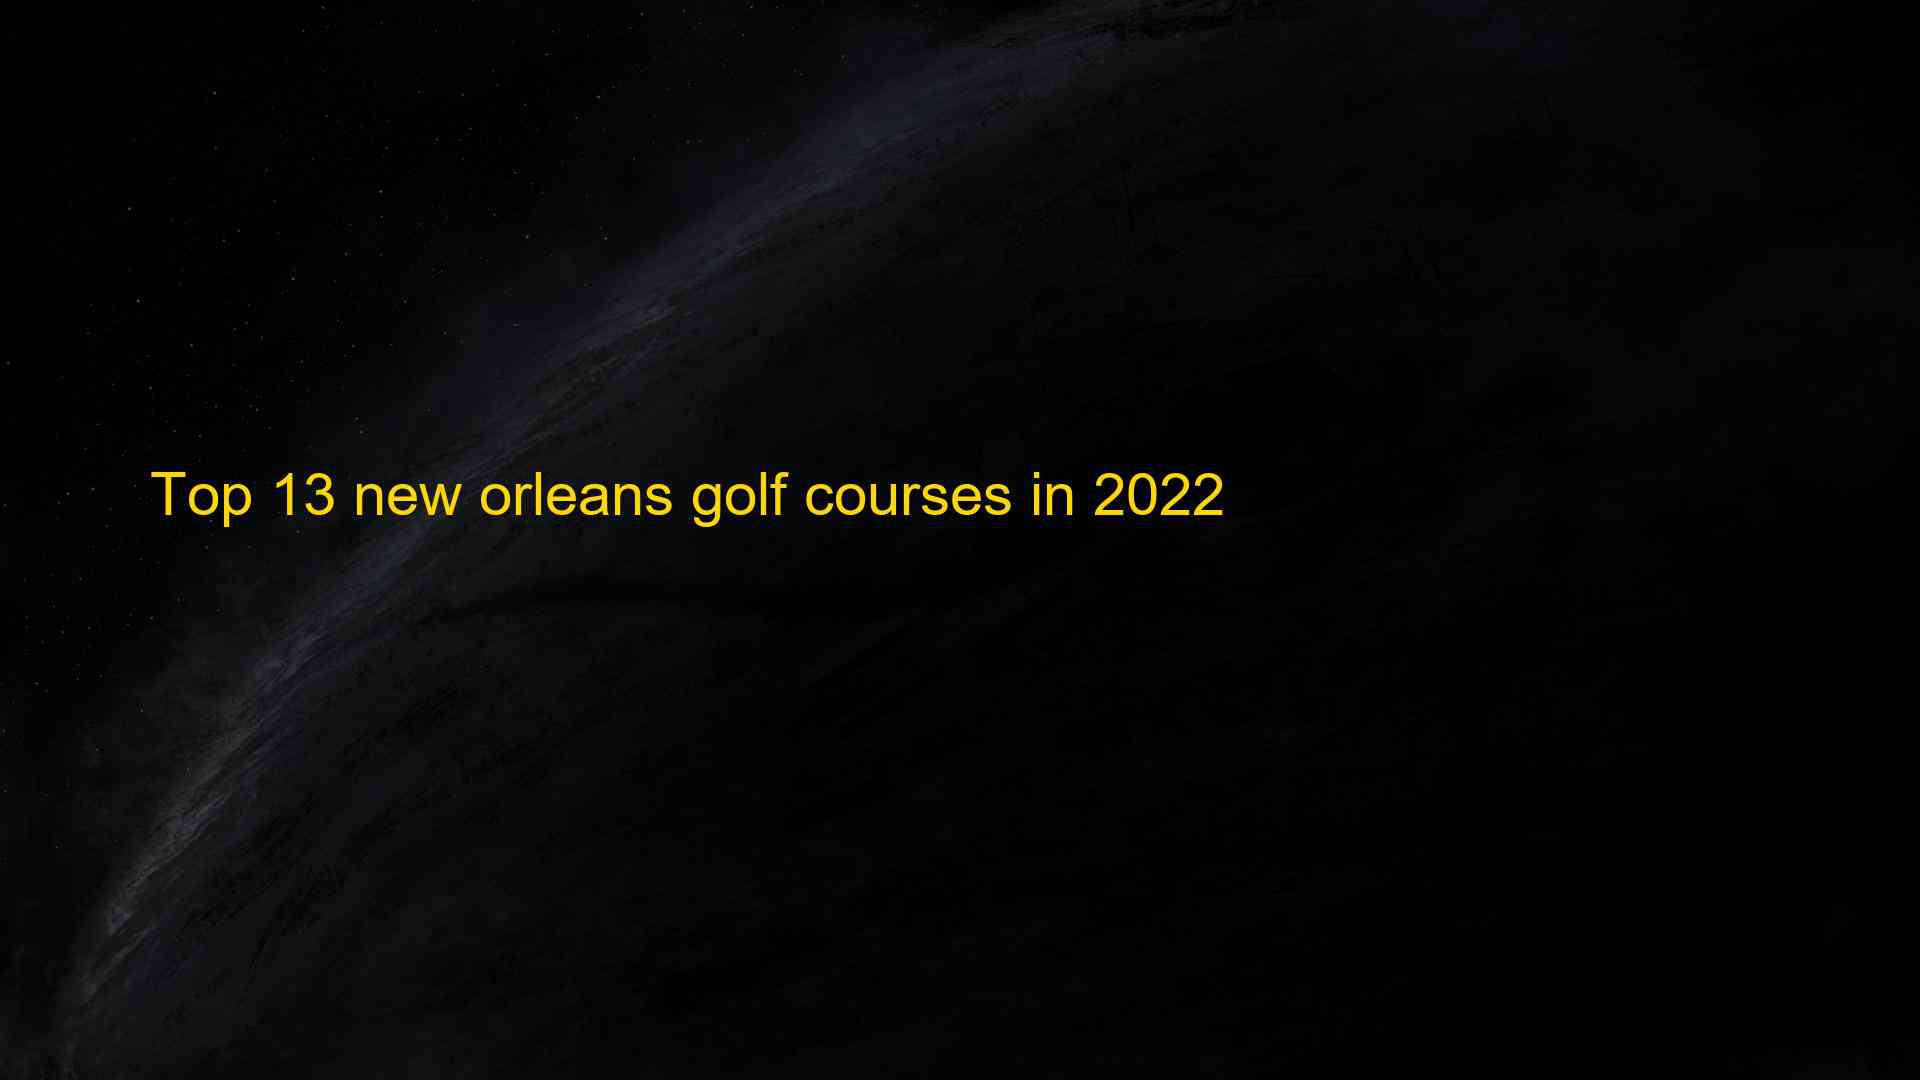 Top 13 new orleans golf courses in 2022 1660890107